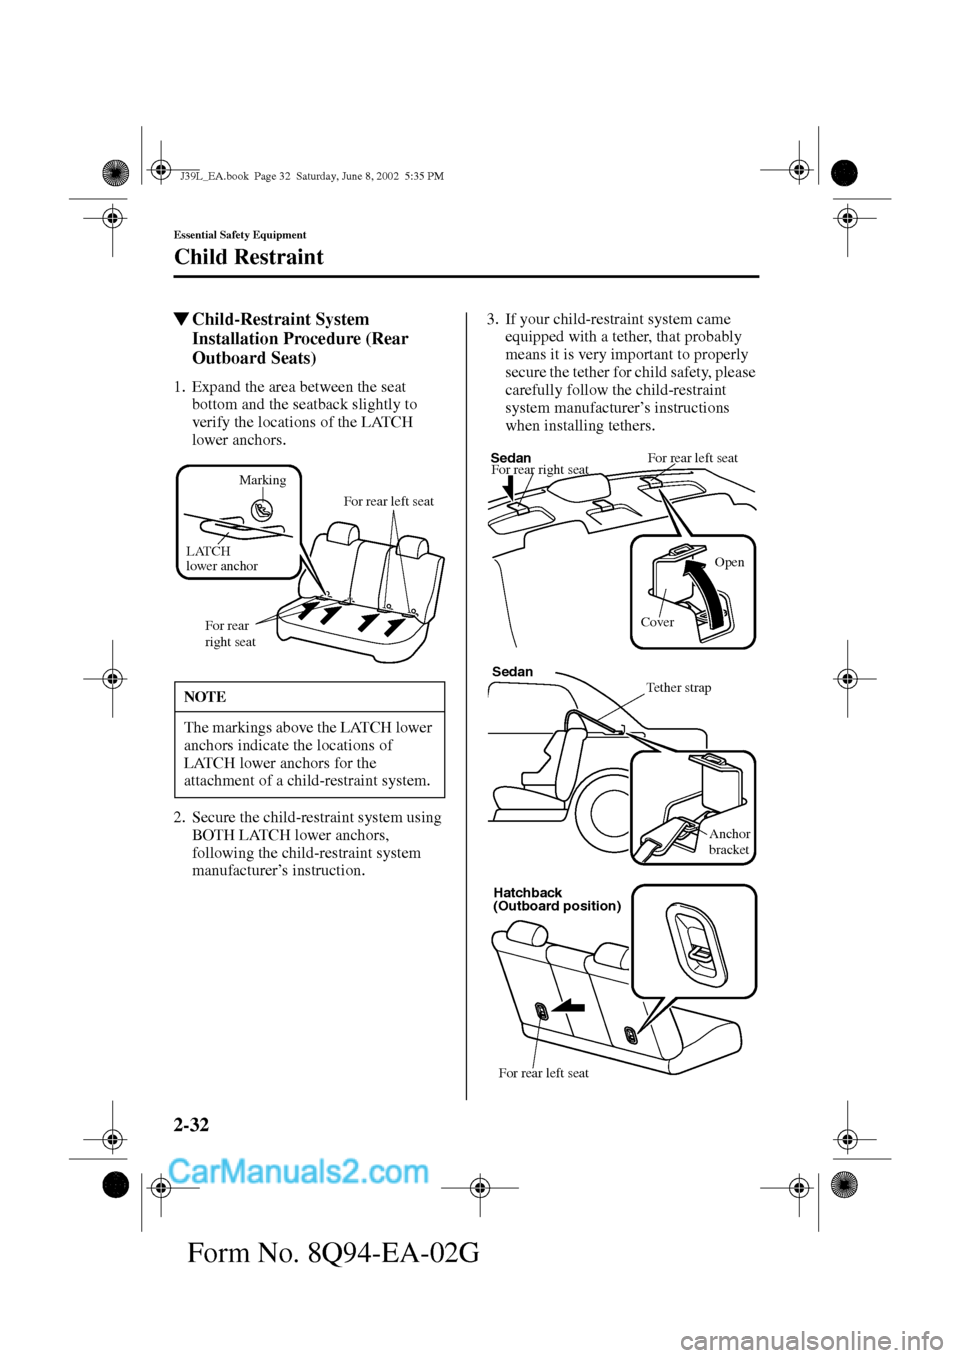 MAZDA MODEL PROTÉGÉ 2003   (in English) Service Manual 2-32
Essential Safety Equipment
Child Restraint
Form No. 8Q94-EA-02G
Child-Restraint System 
Installation Procedure (Rear 
Outboard Seats)
1. Expand the area between the seat 
bottom and the seatback